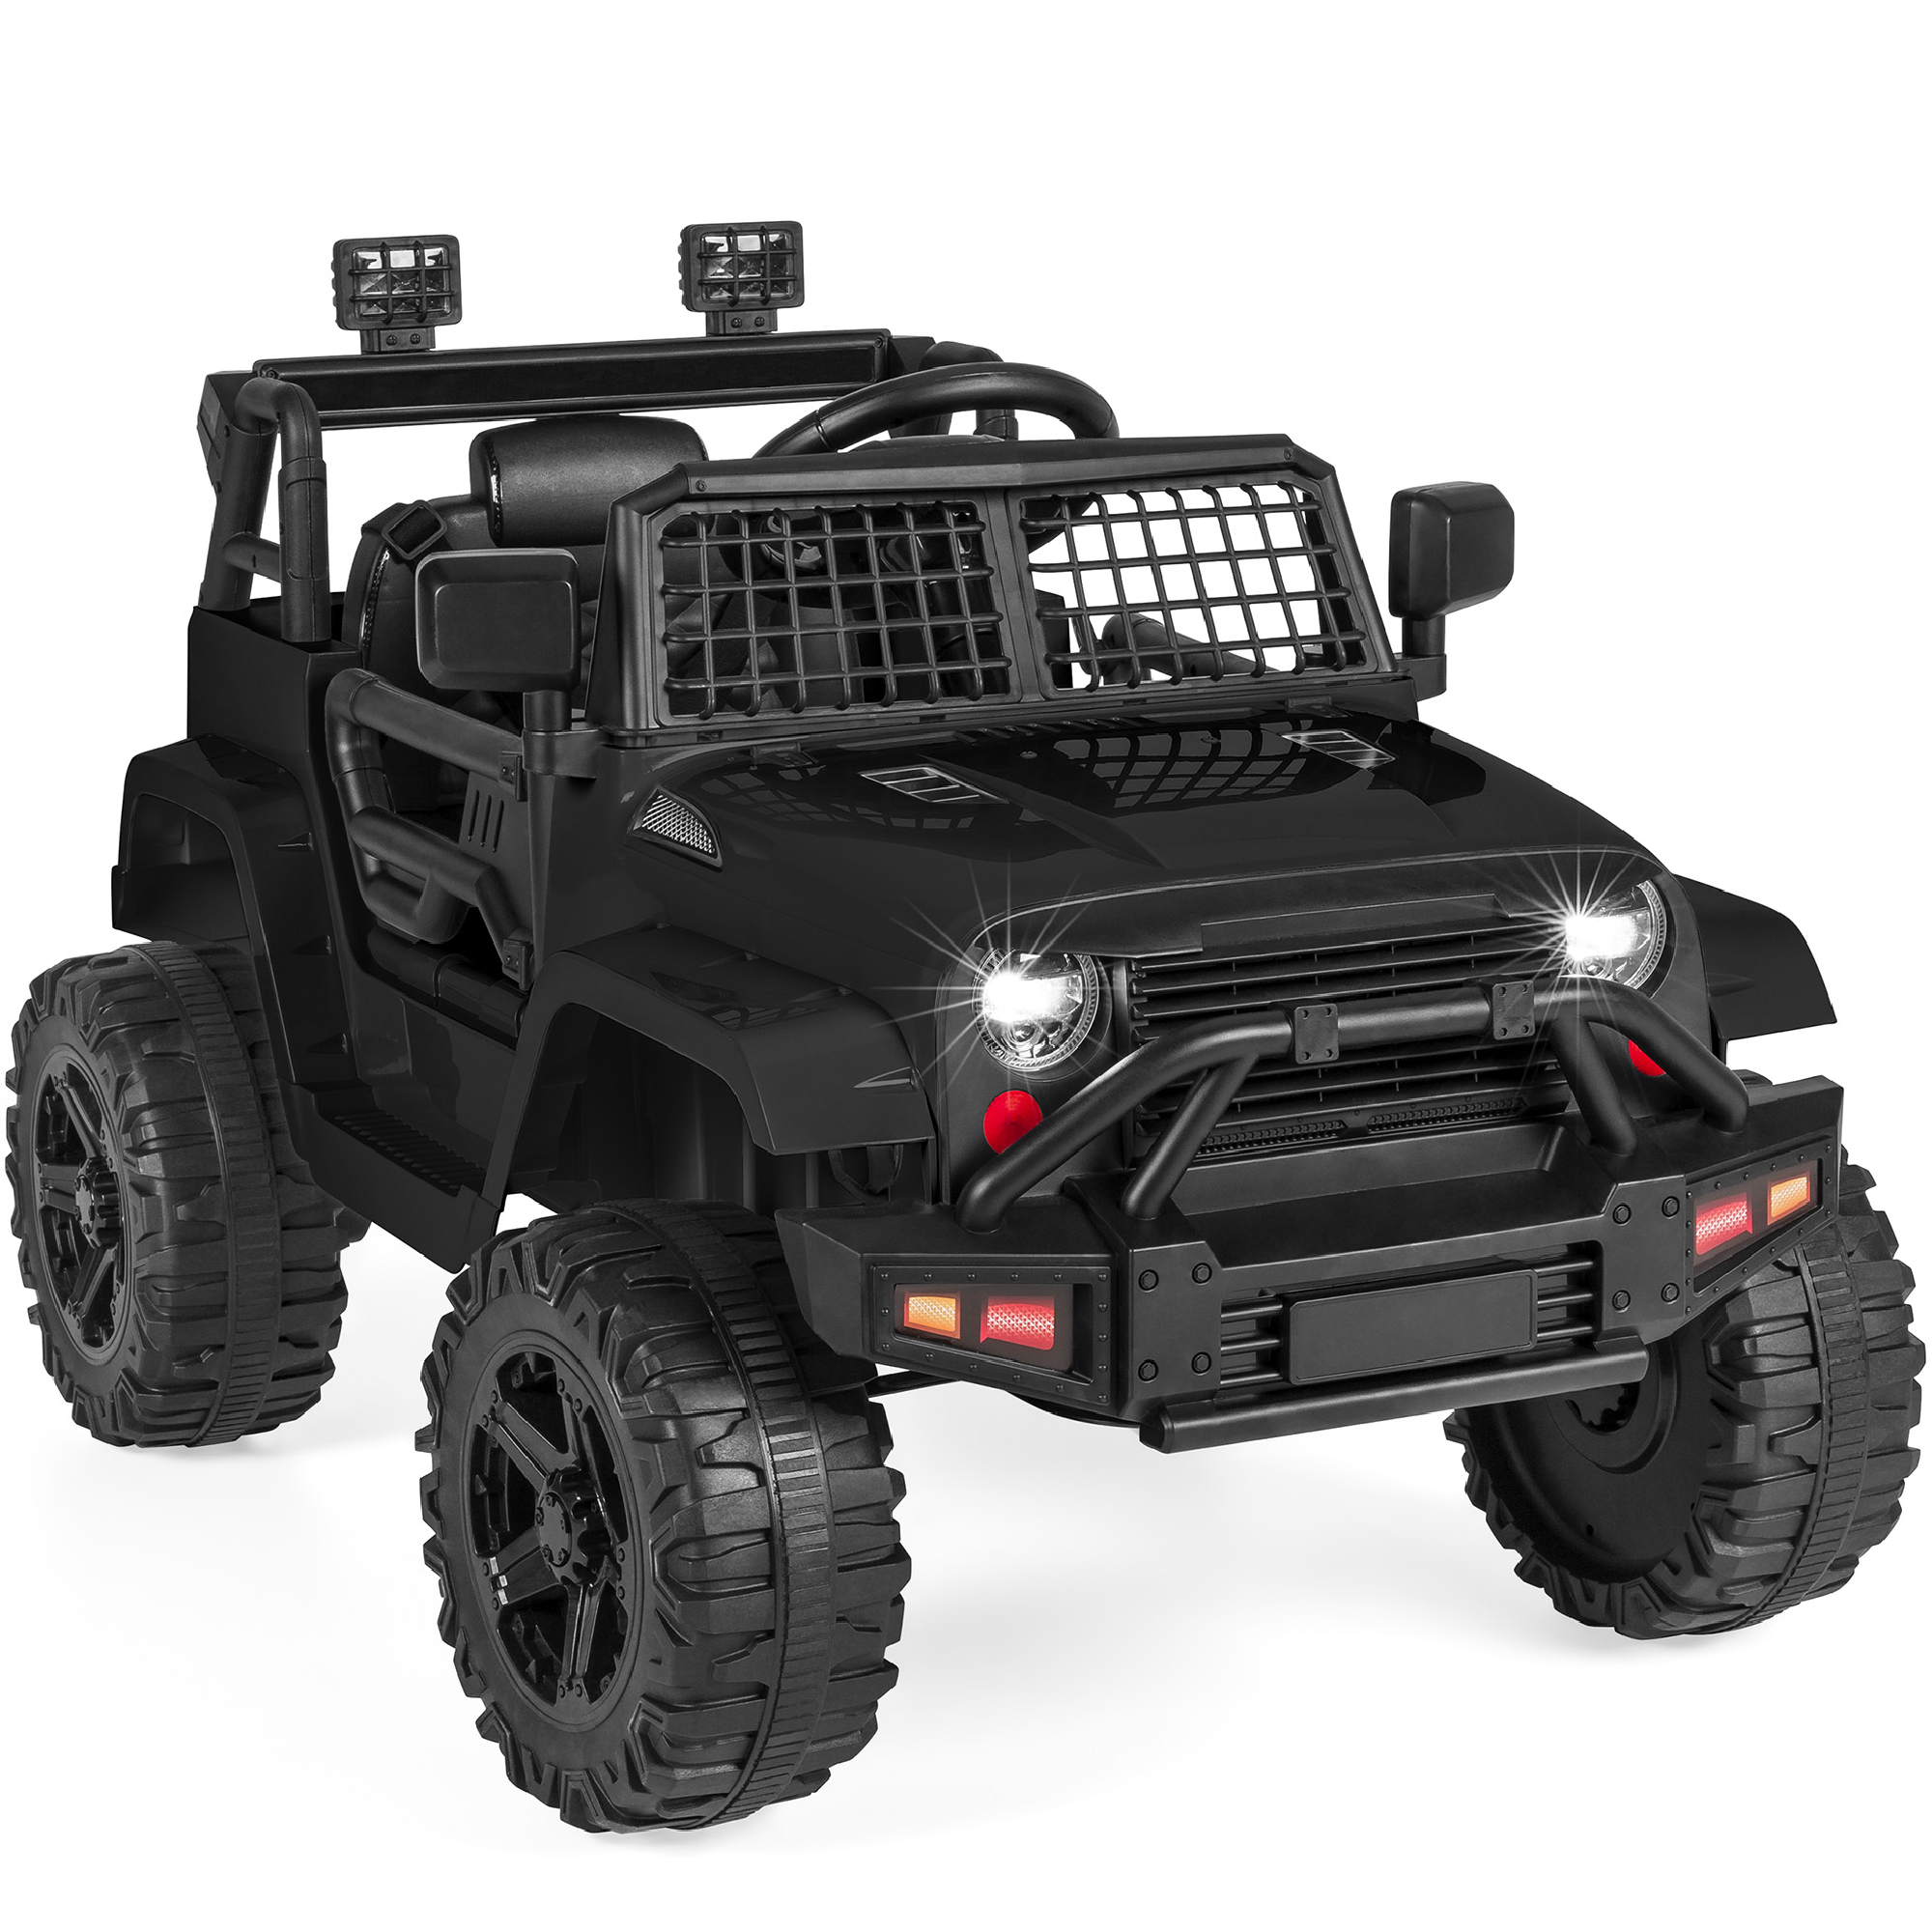 Best Choice Products 12V Kids Ride On Truck Car w/ Parent Remote Control, Spring Suspension, LED Lights - Black - image 1 of 8